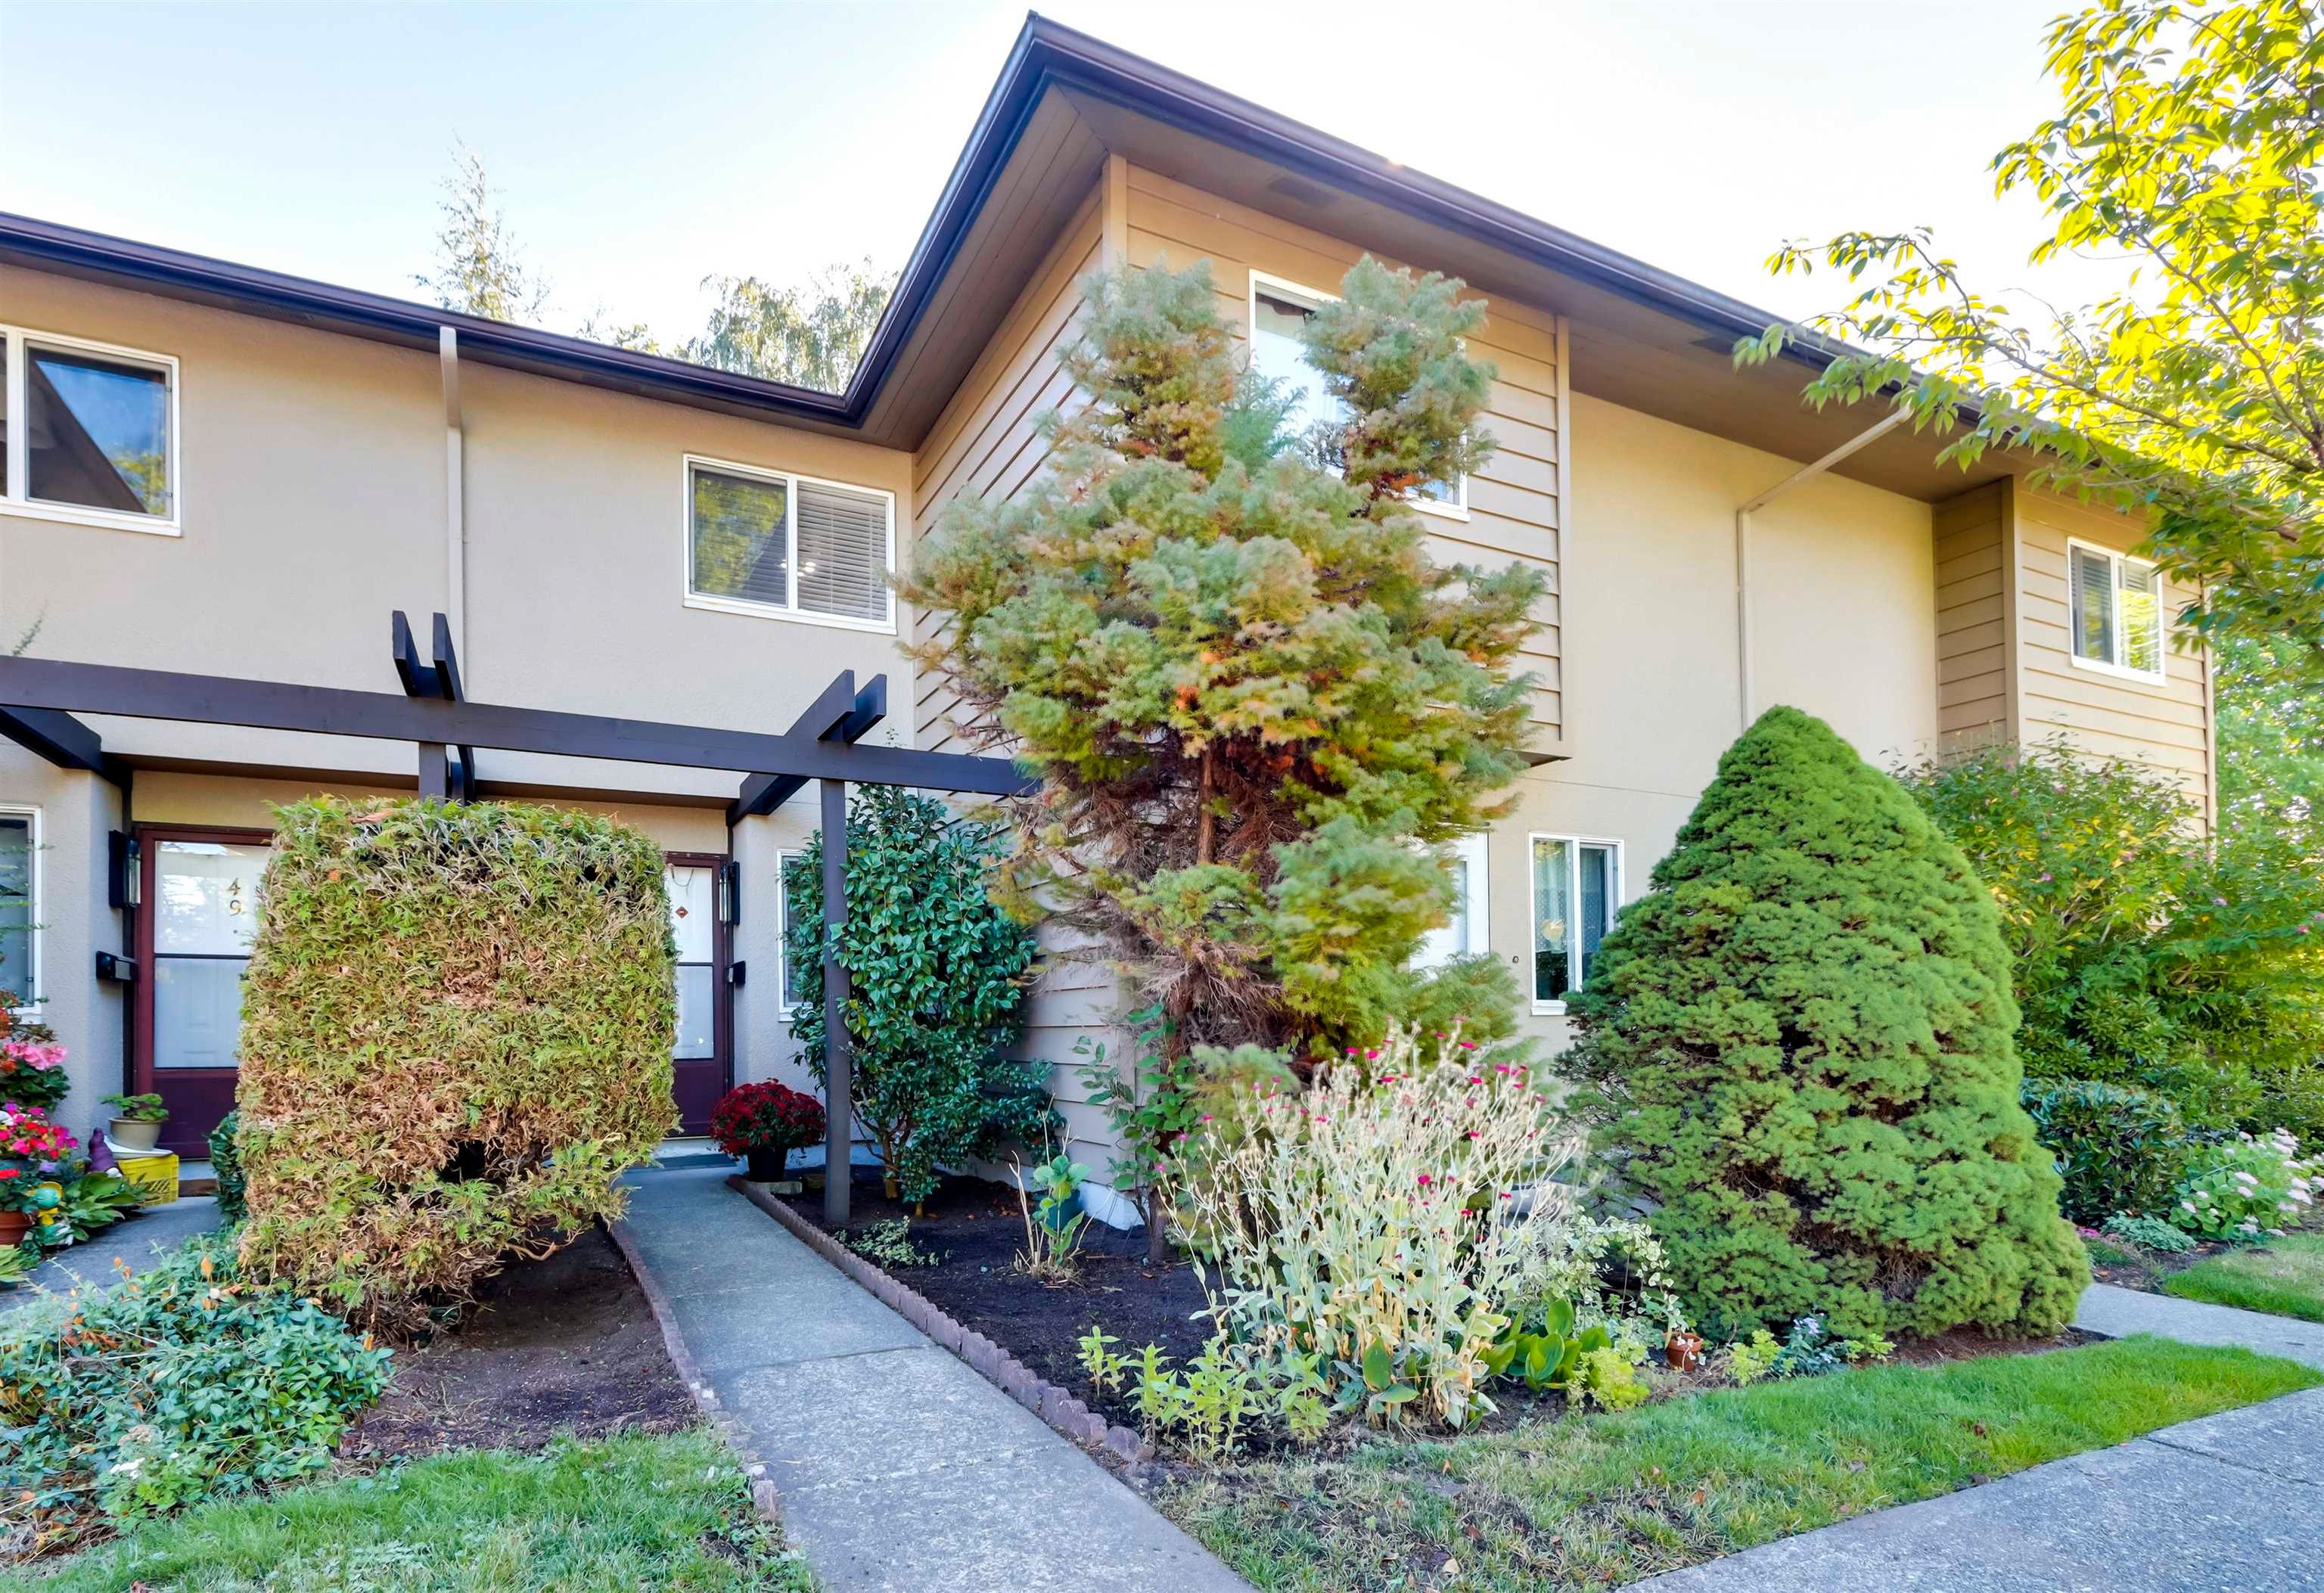 Main Photo: 50 11160 KINGSGROVE Avenue in Richmond: Ironwood Townhouse for sale : MLS®# R2615805